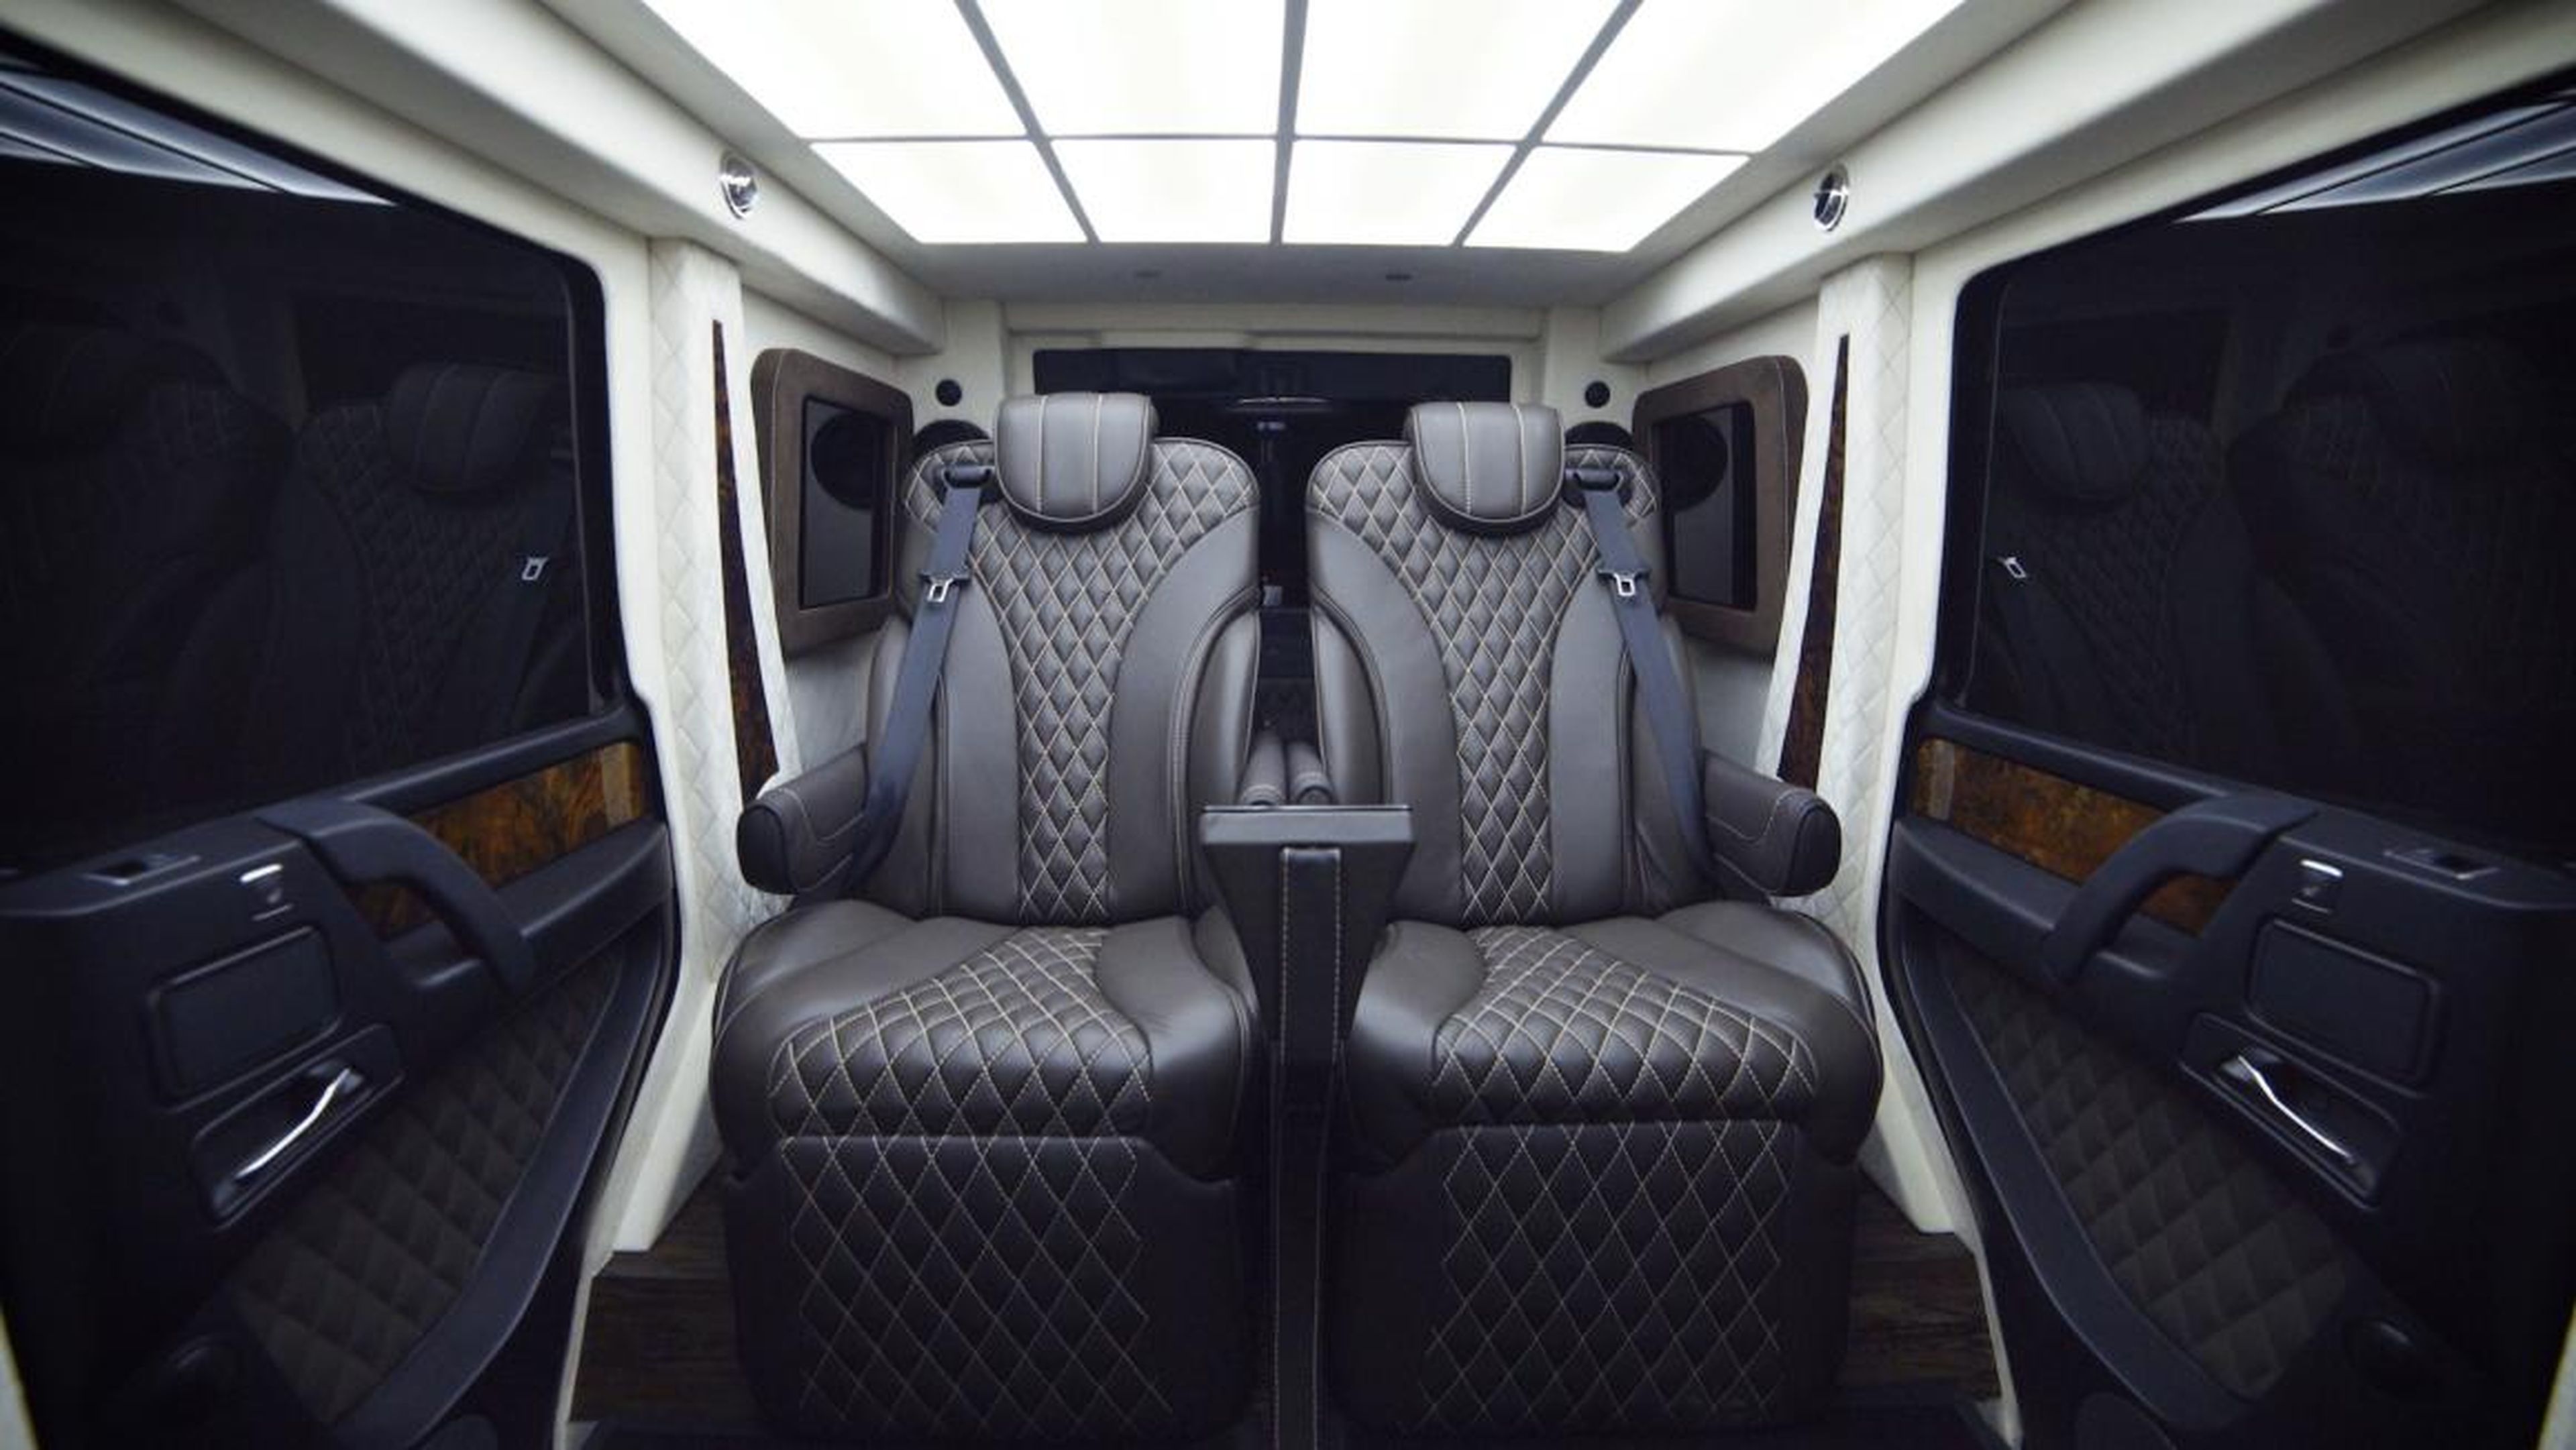 There is a customizable daylight headliner that is made to imitate real sunlight in a highly accurate manner so as to "reduce fatigue and increase overall well-being," as much as one can in an armored car built to withstand